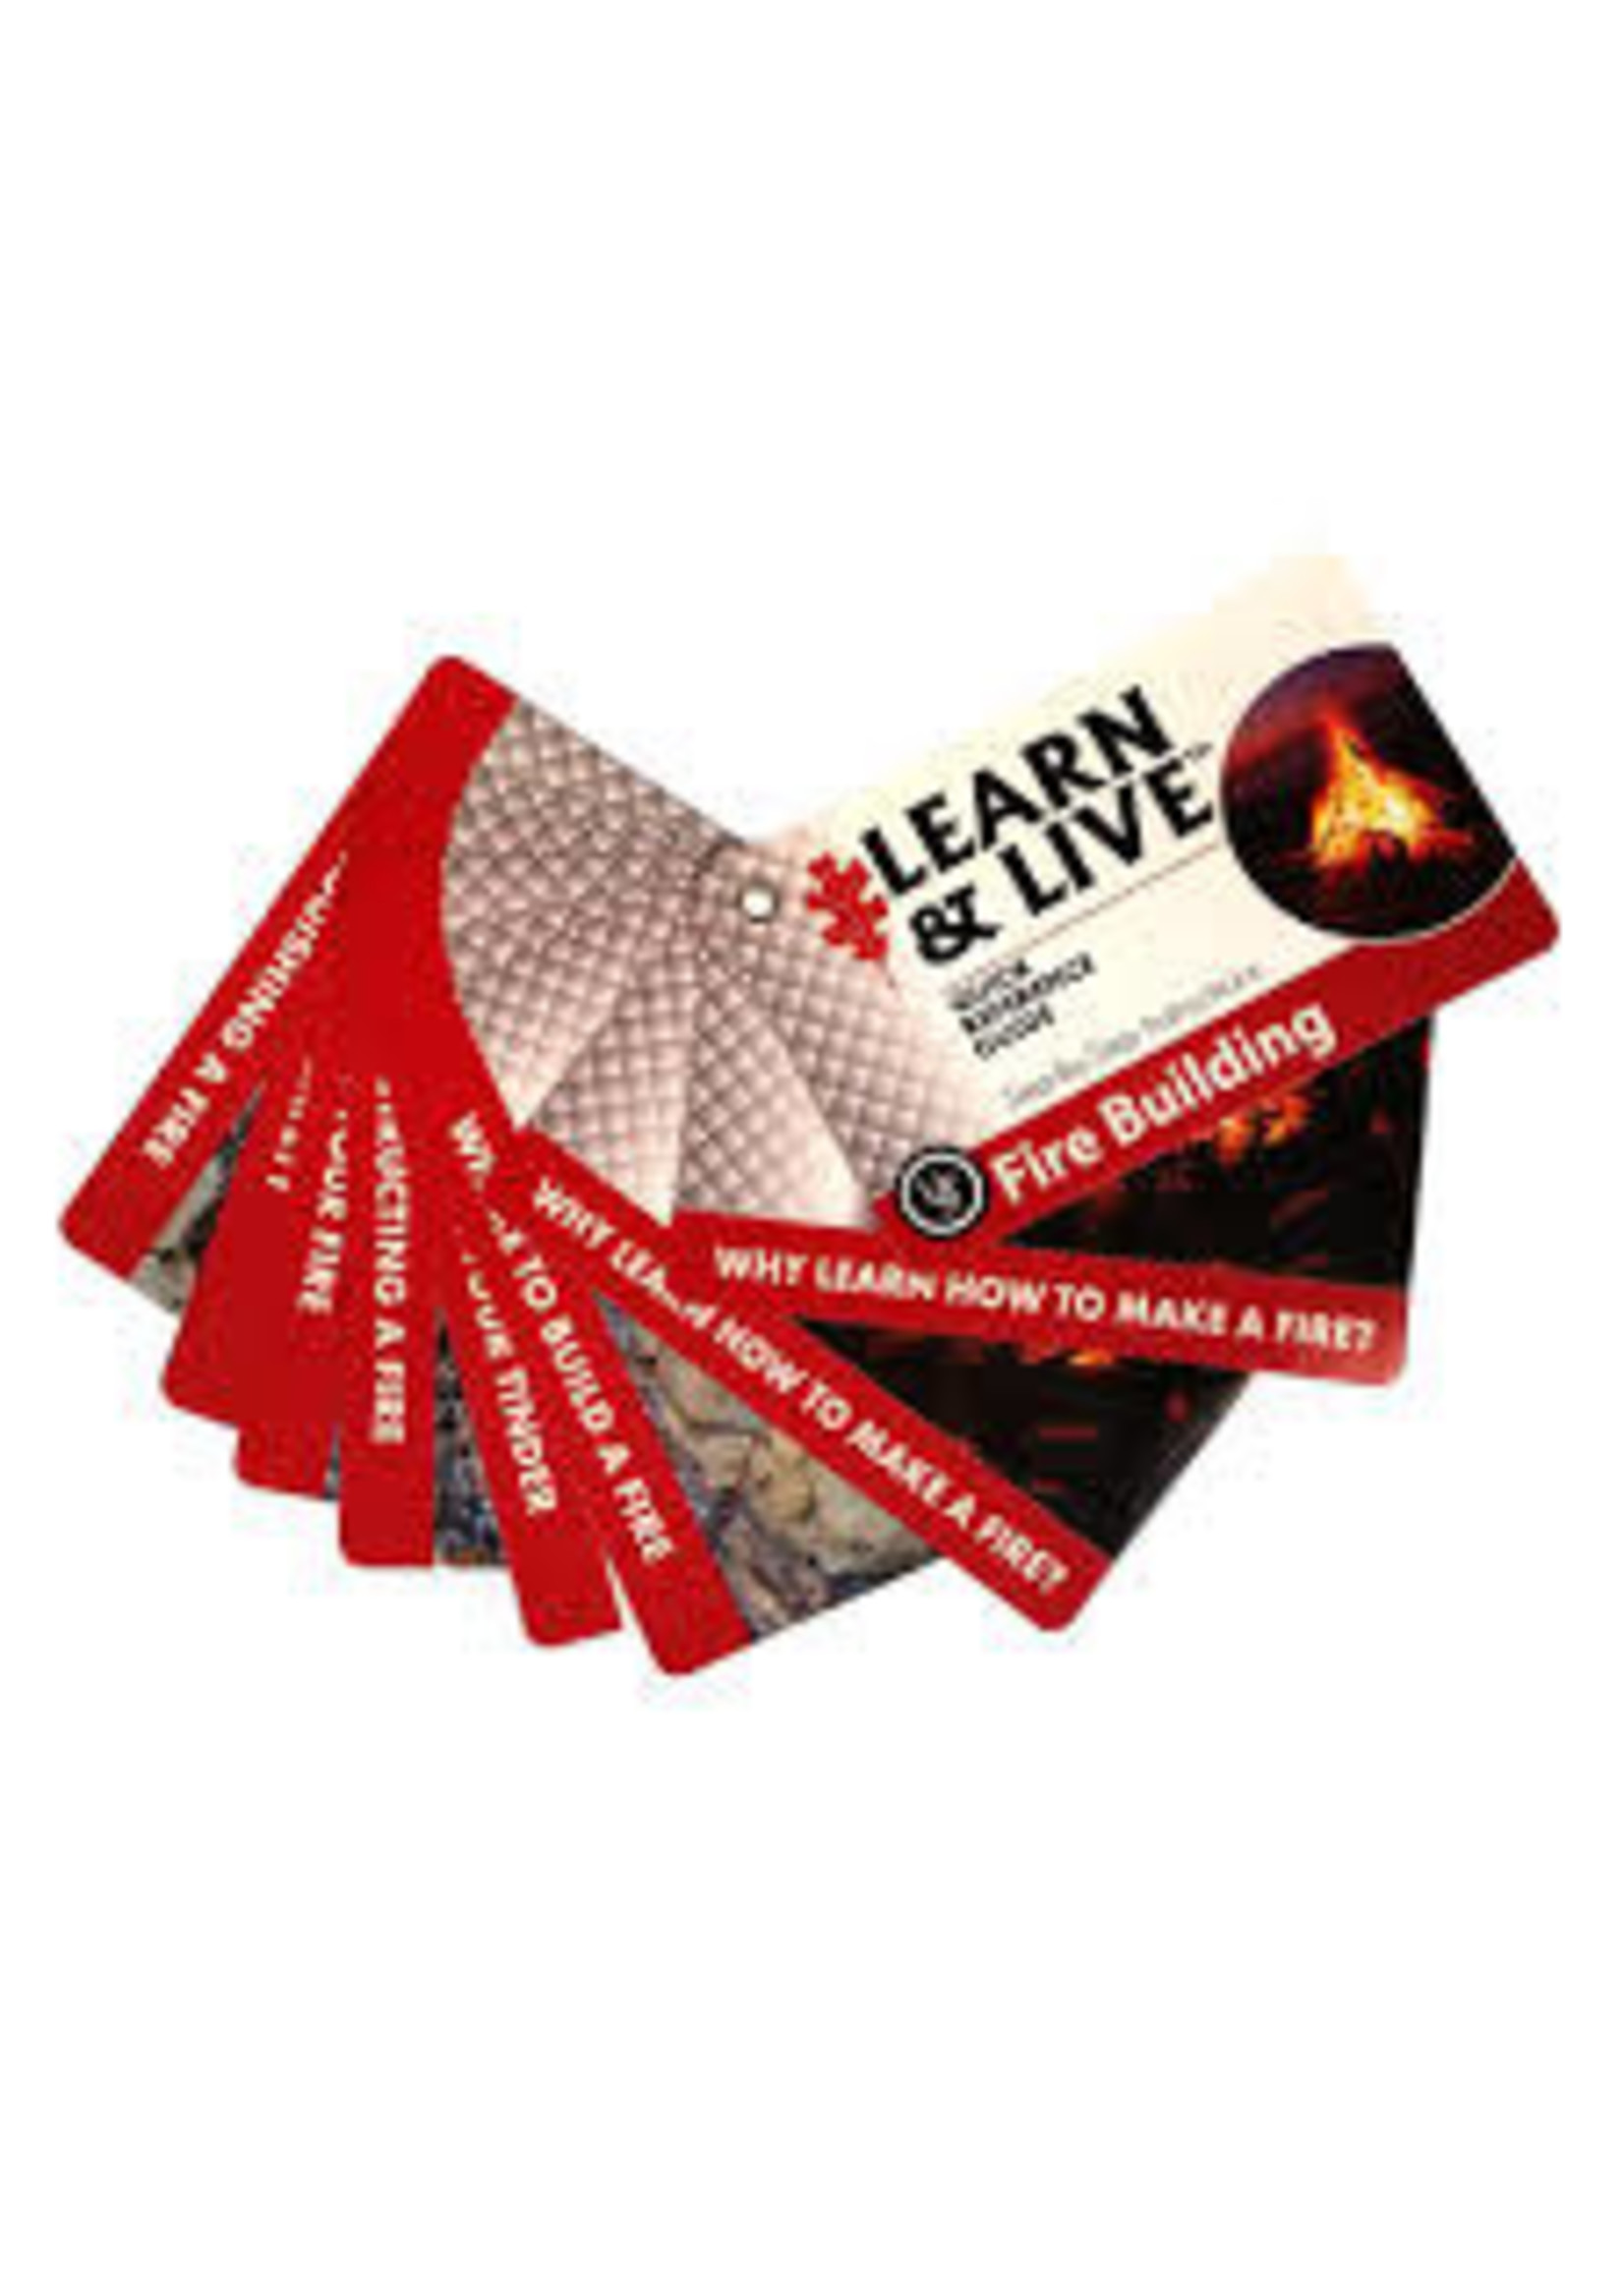 UST UST FIRE BUILDING CARDS